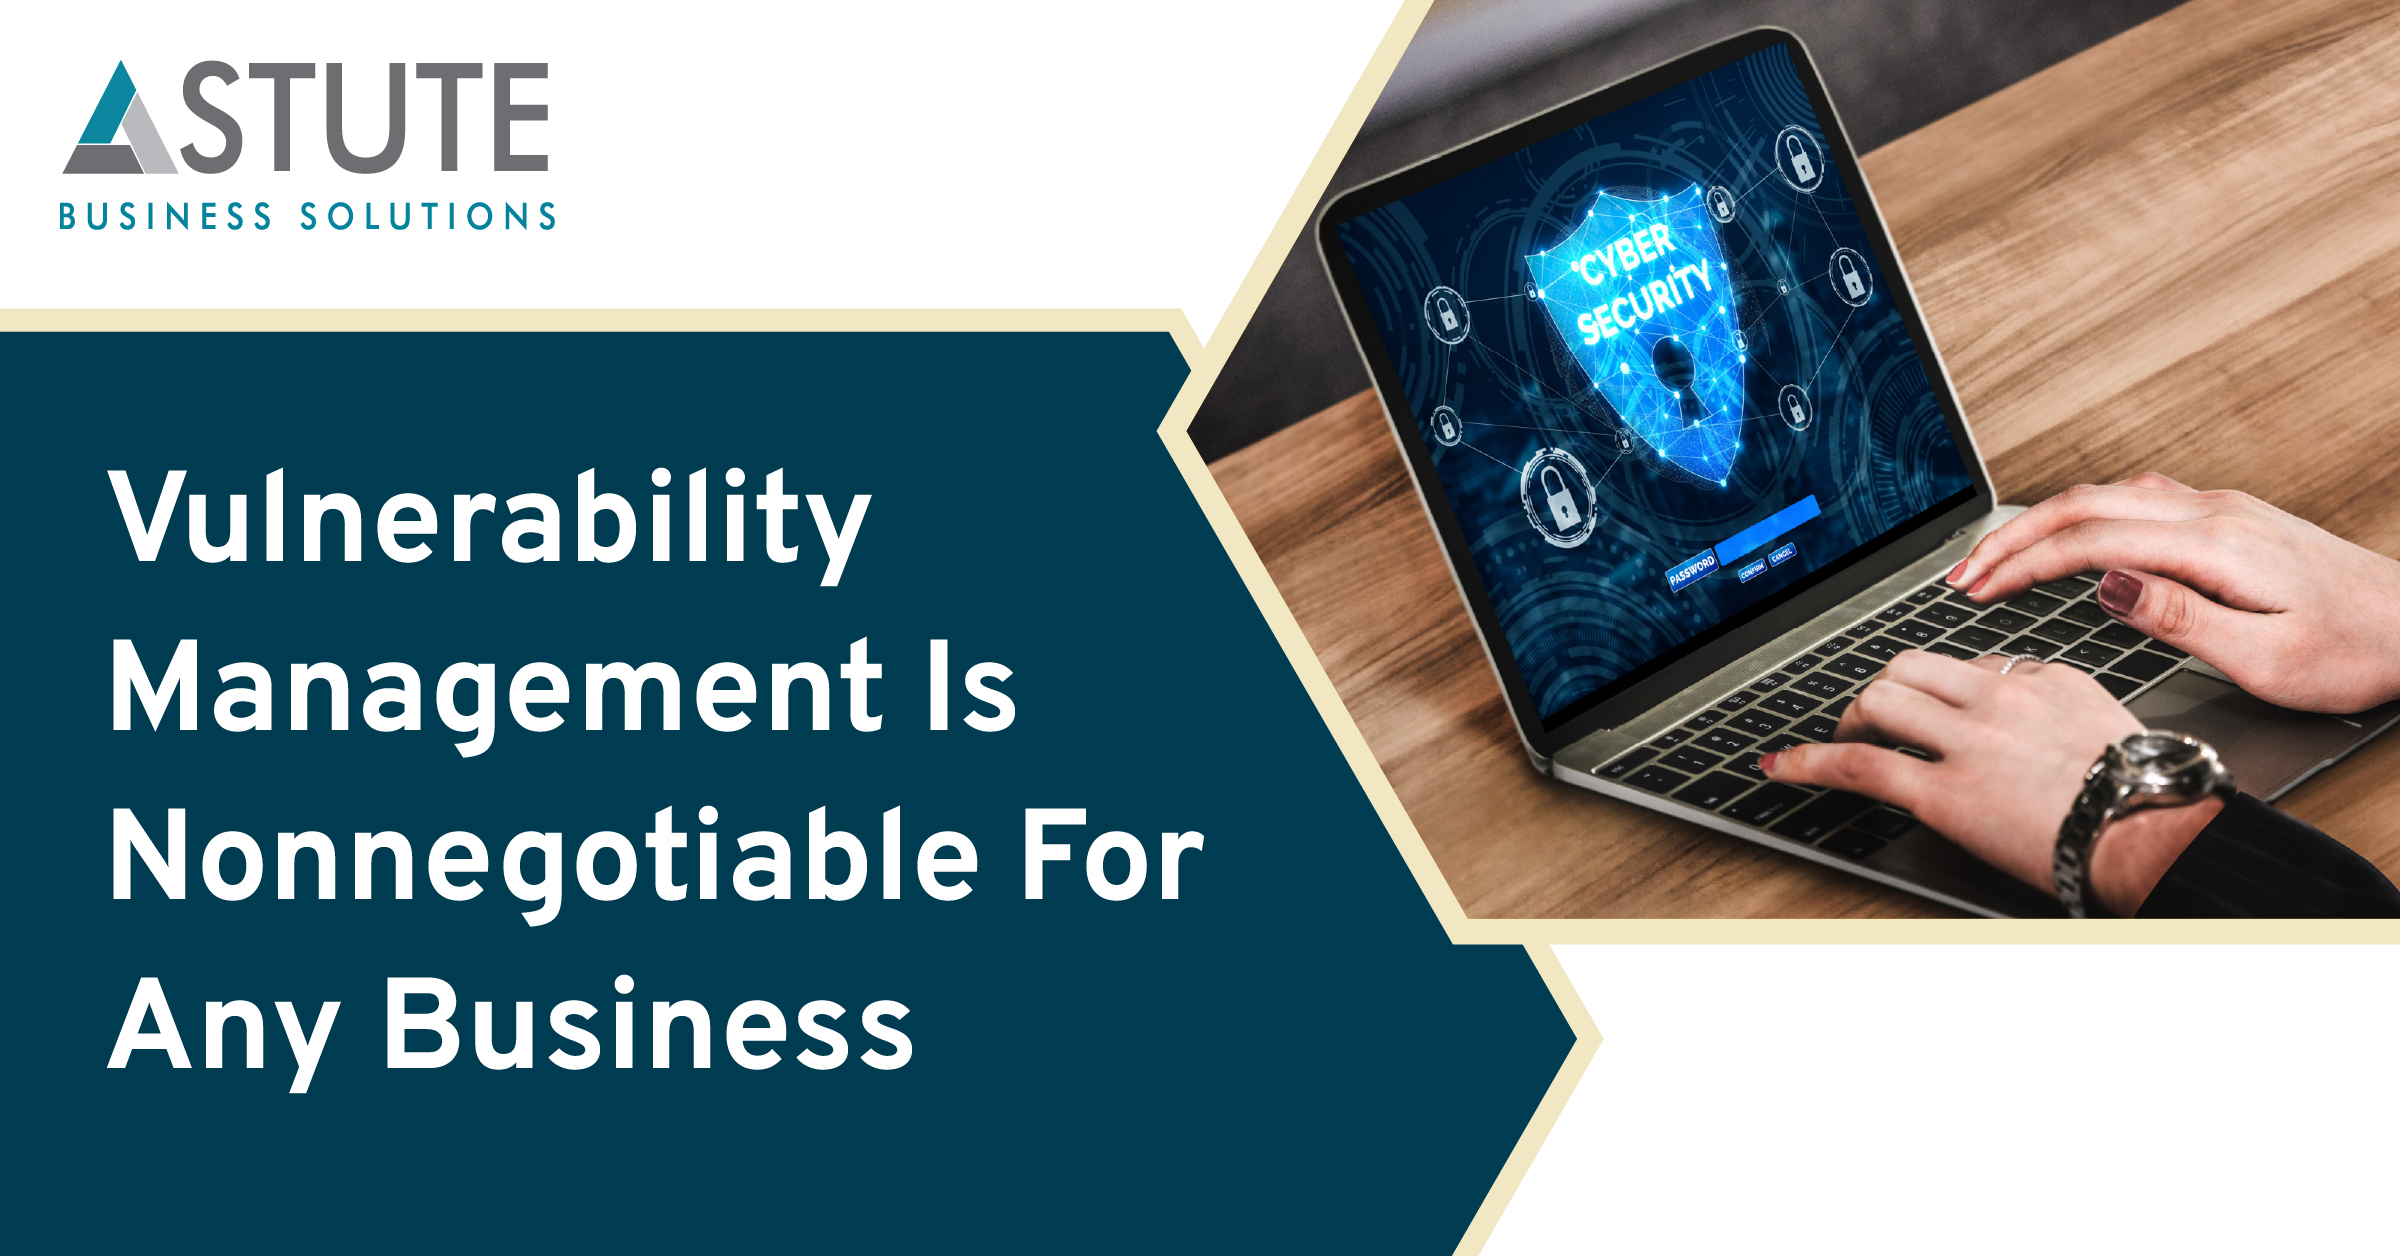 Vulnerability Management Is Nonnegotiable For Any Business